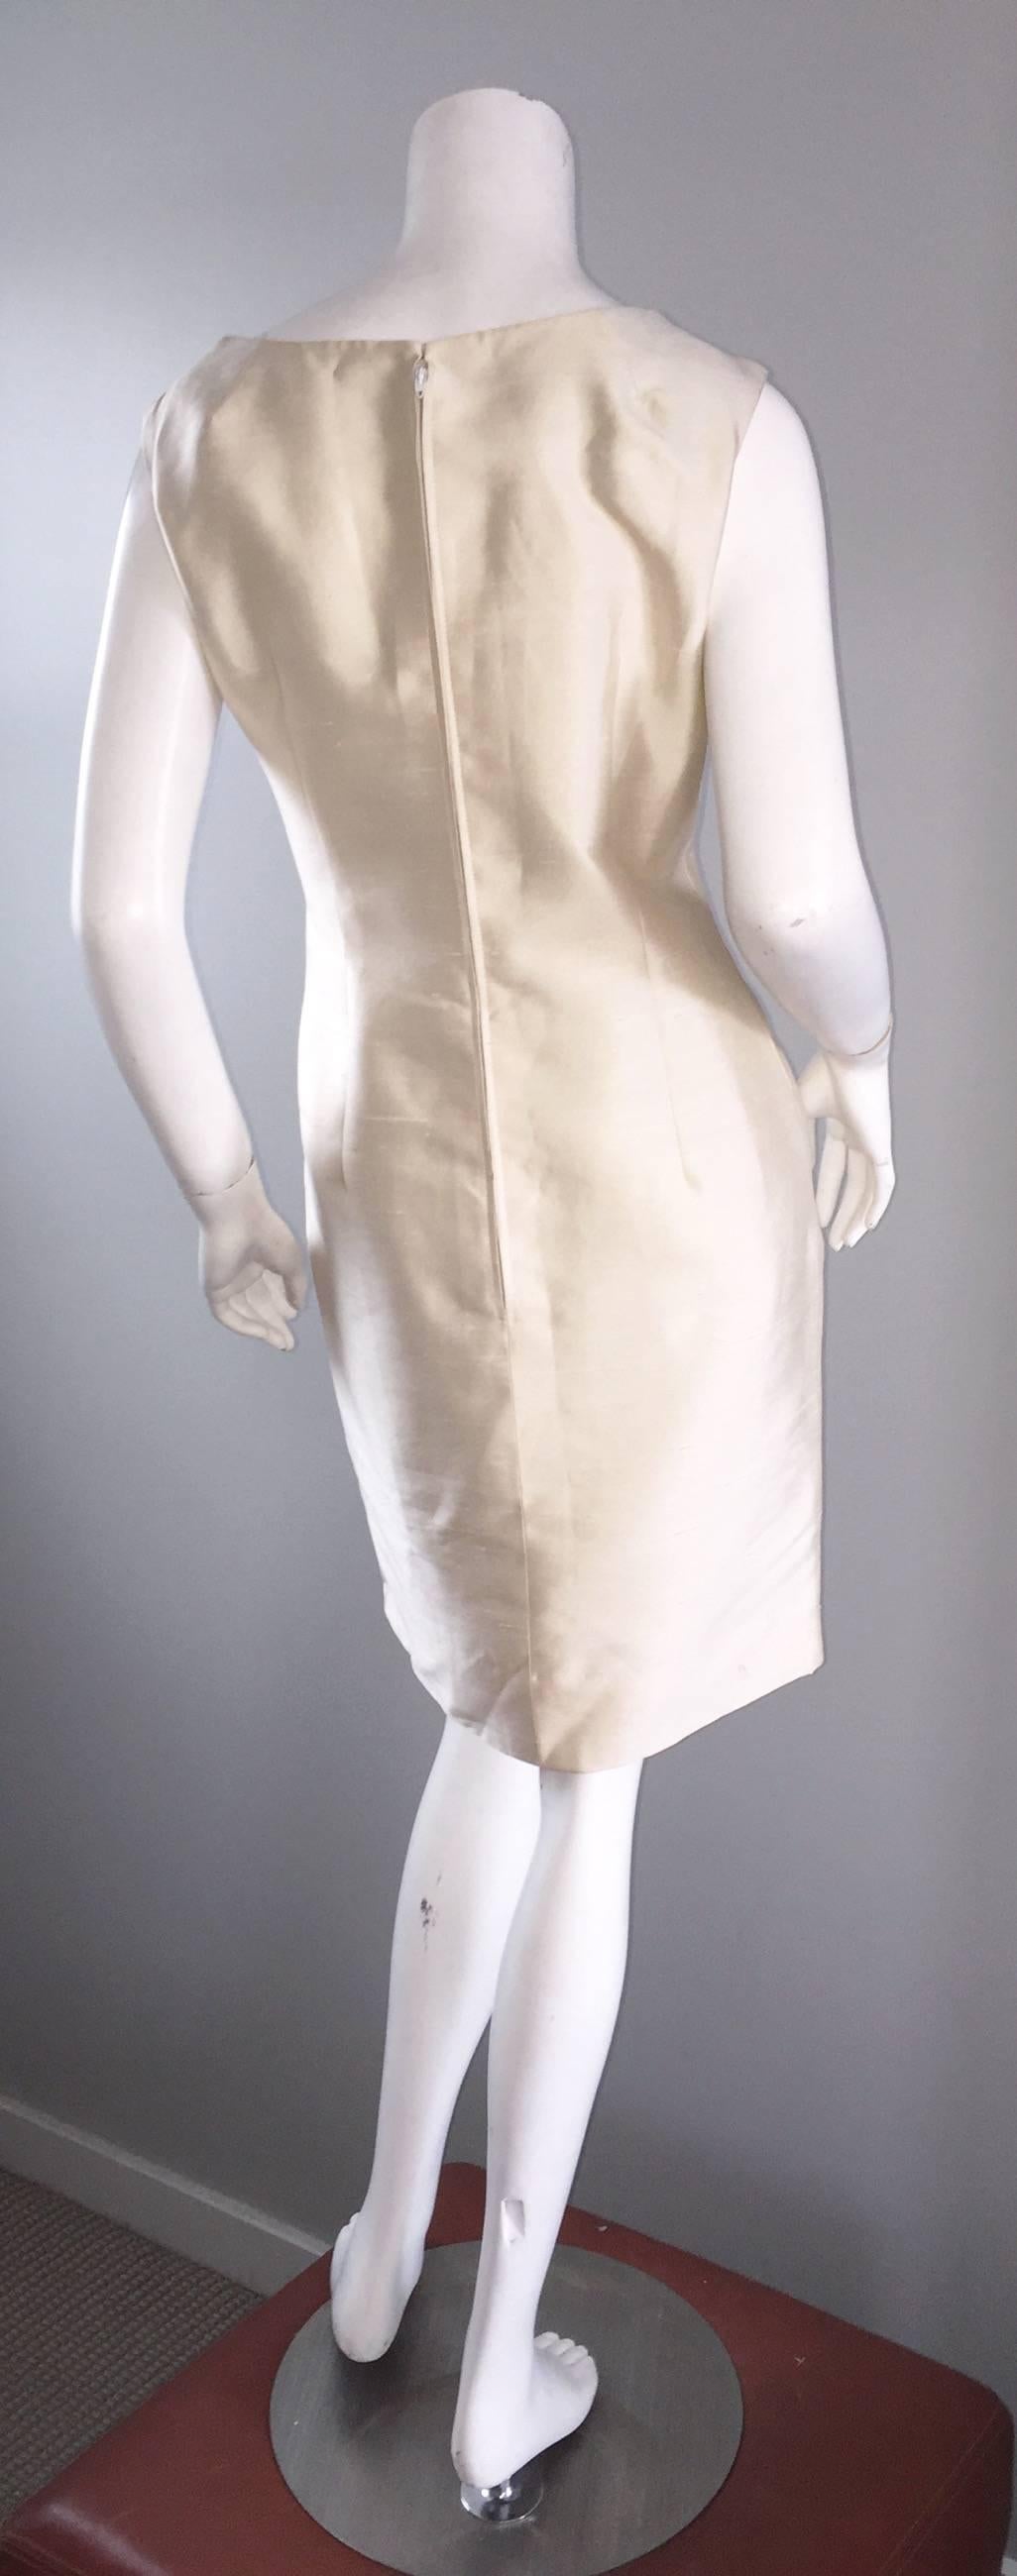 Women's Chic 1960s Ivory Off White Raw Silk Vintage Shift Dress w/ Oversized Bow Collar